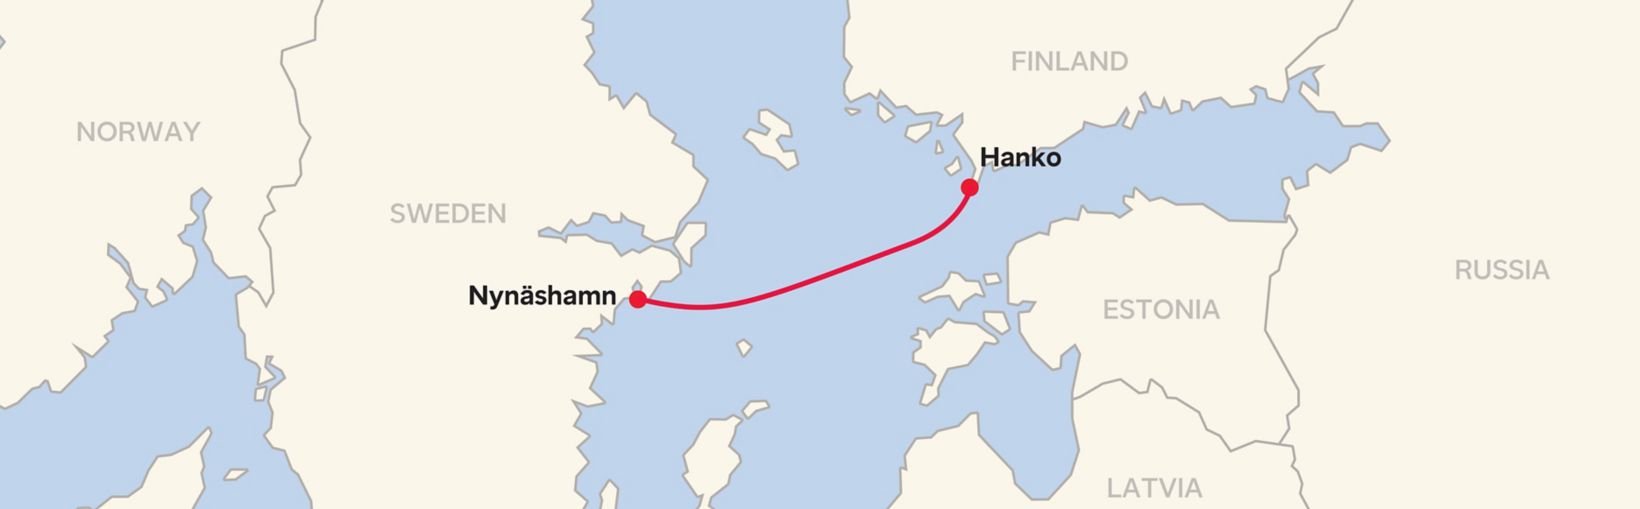 Showing the ferry route between Nynashamn - Hanko